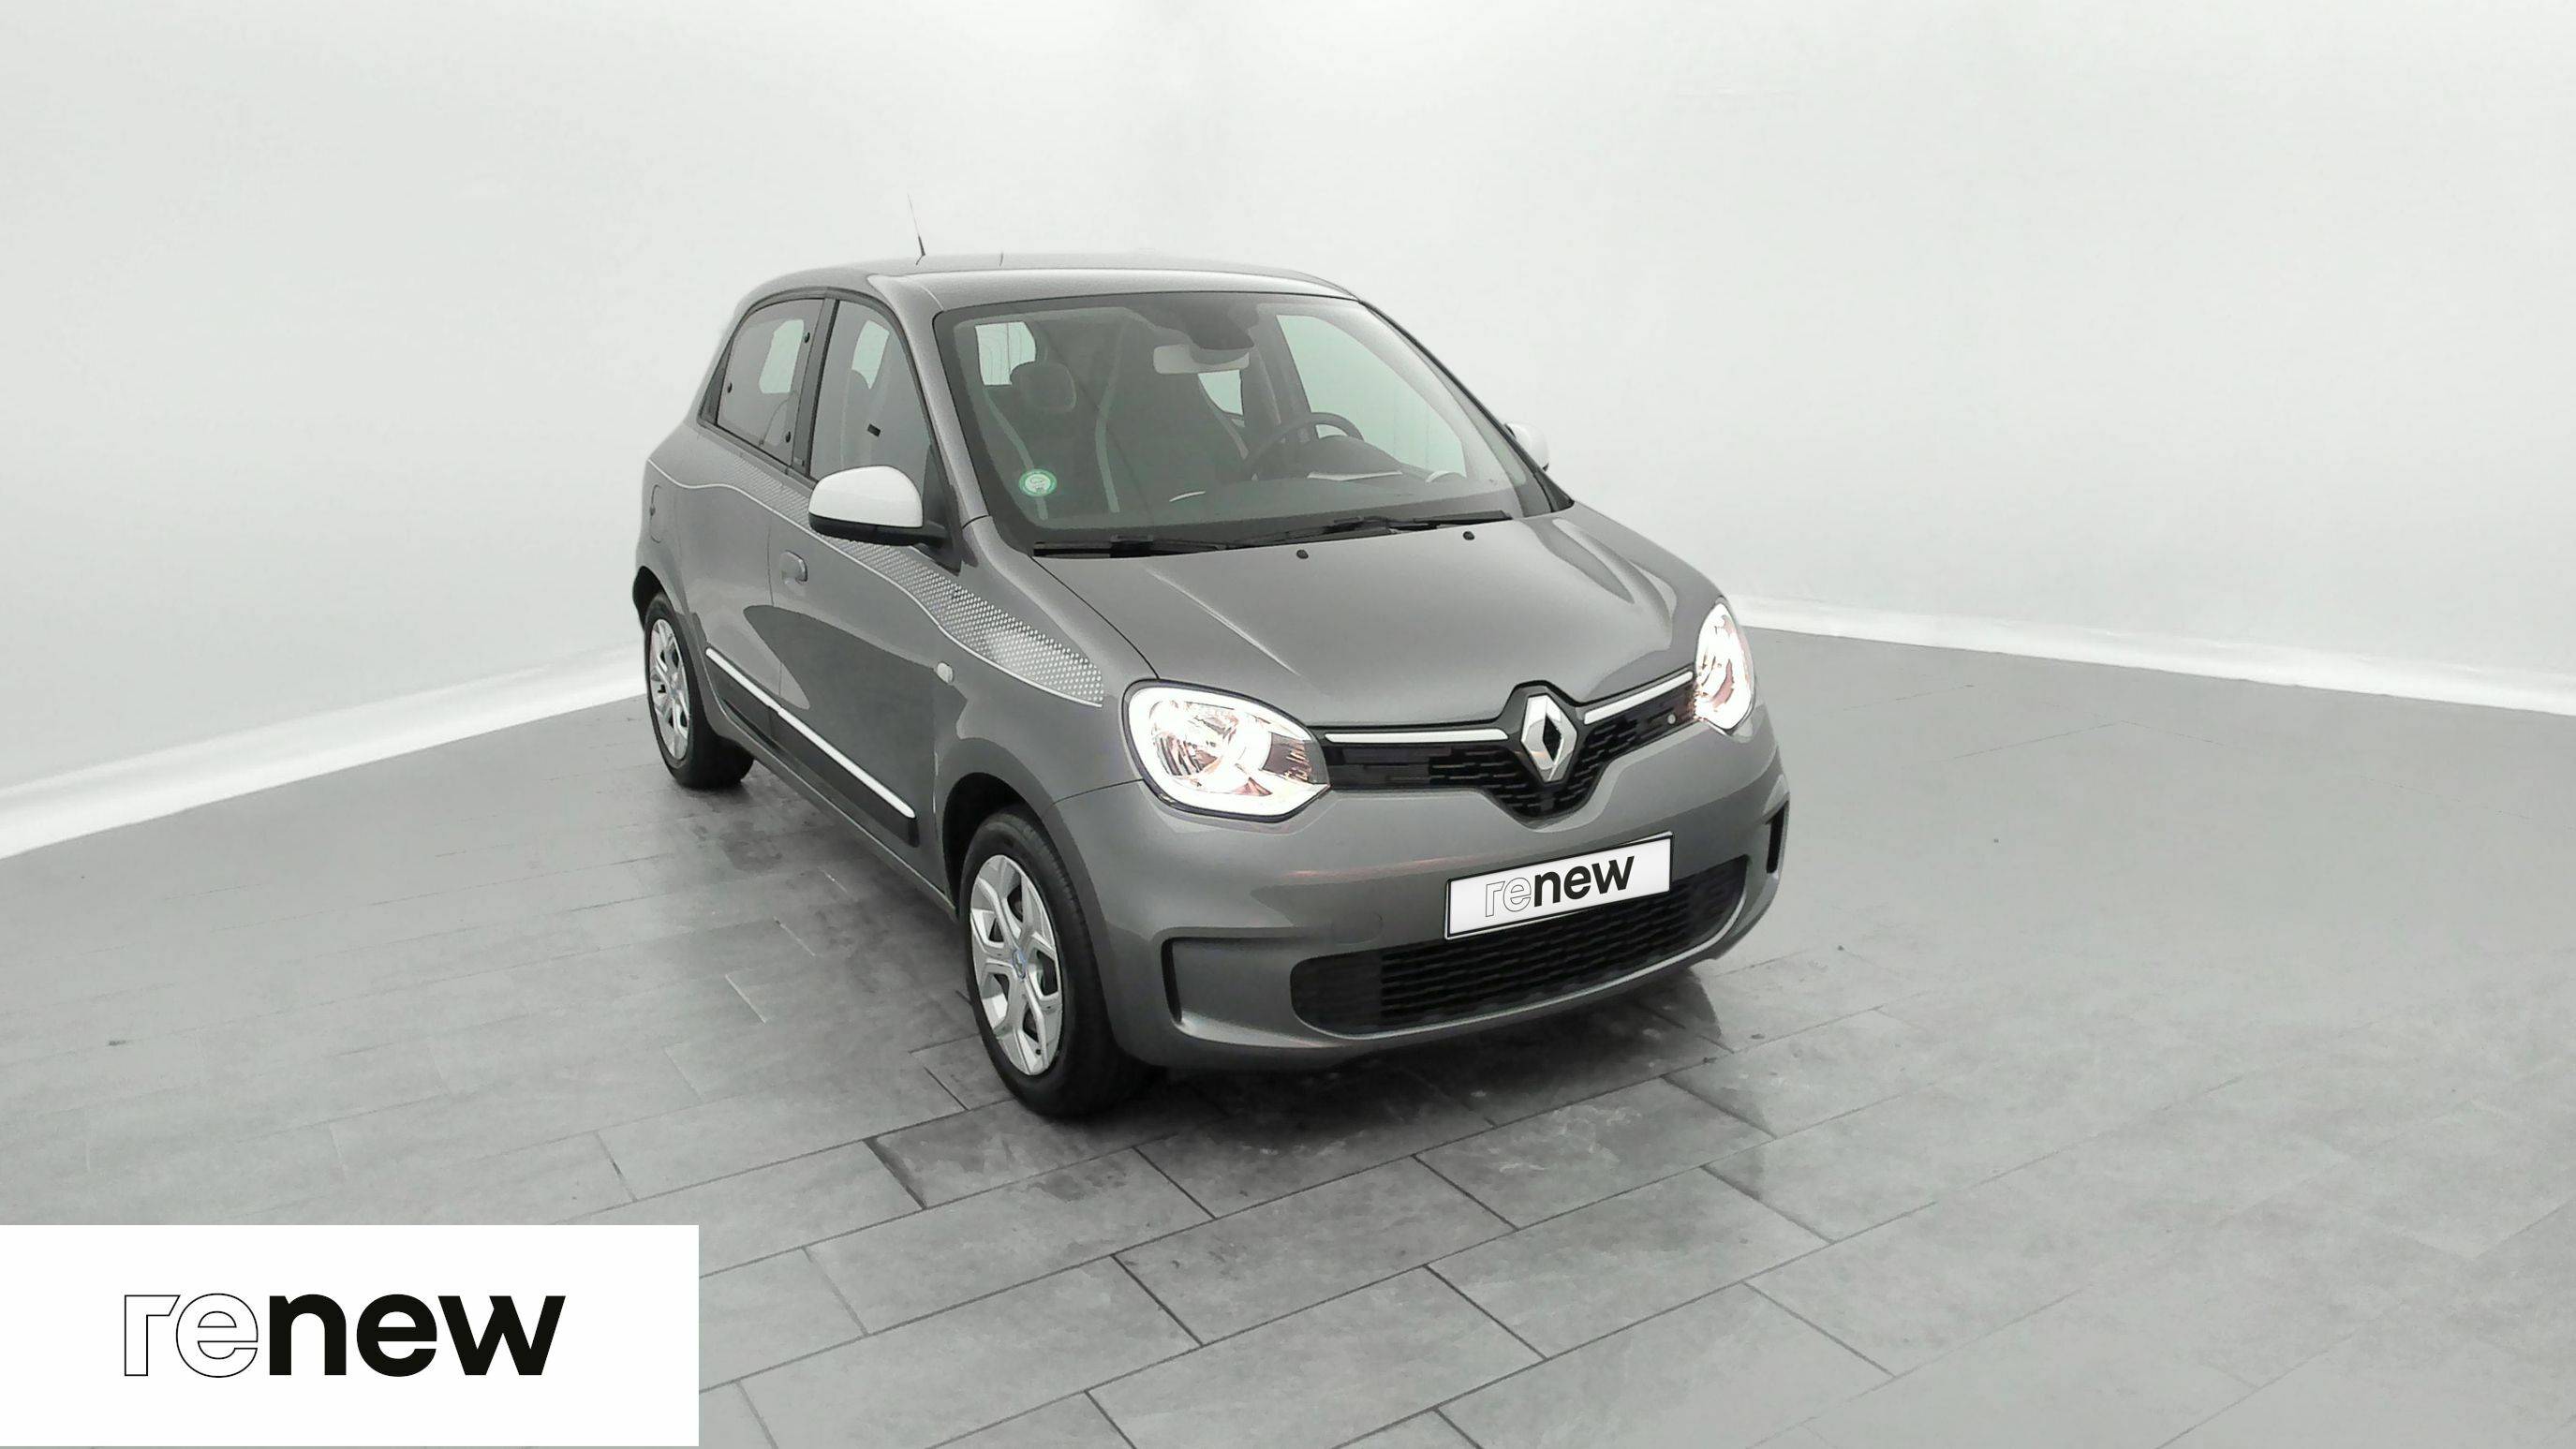 Renault Twingo avec toit ouvrant - HER021517 - Herpa - Véhicules